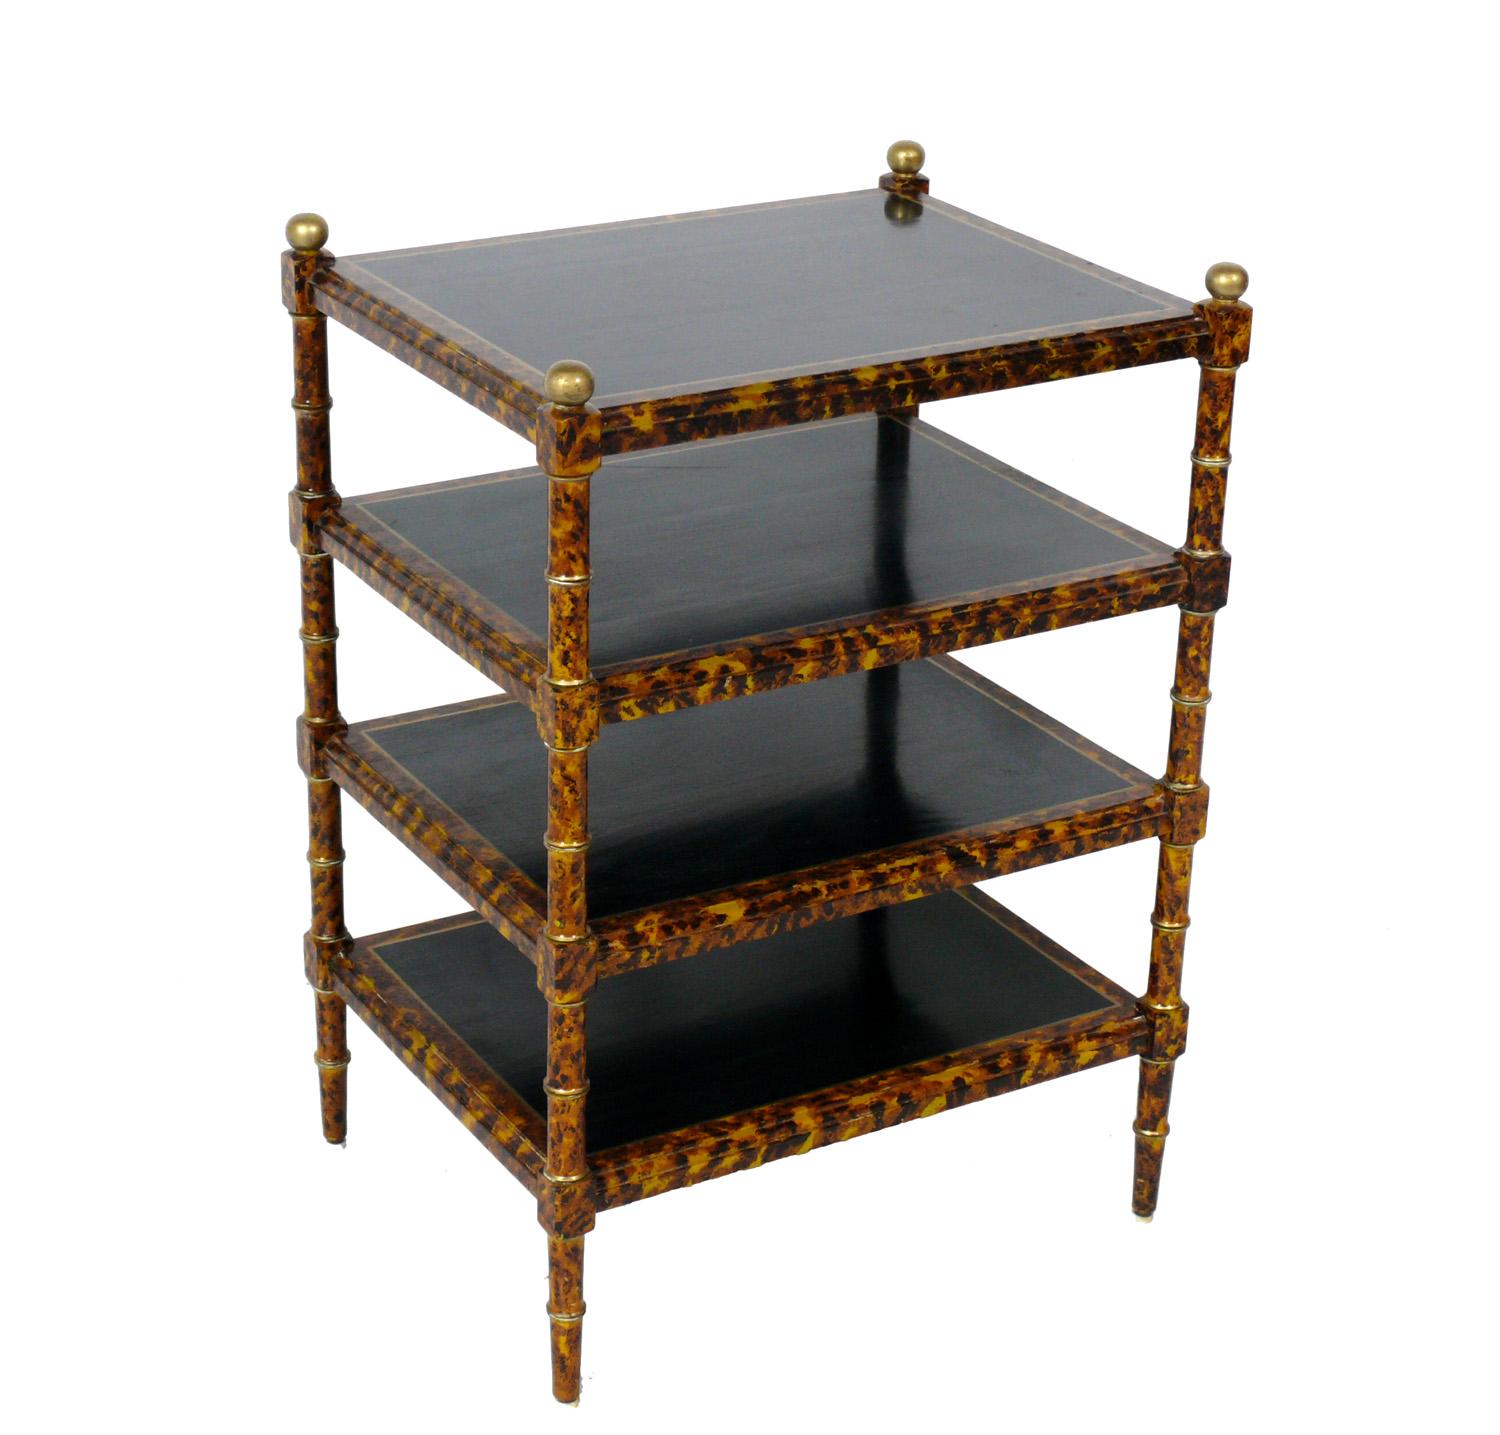 Hollywood Regency Faux Tortoise Painted Shelf or Table Attributed to Maitland Smith